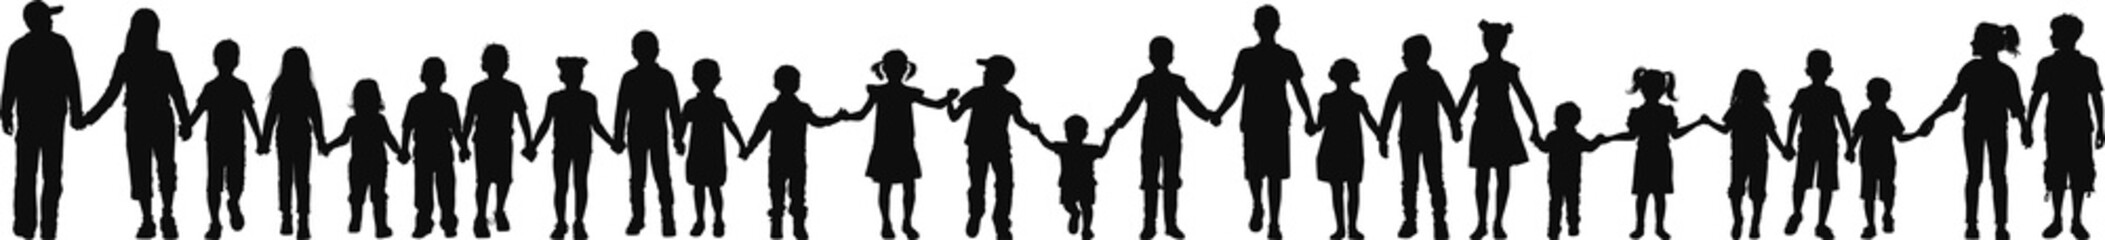 Group of children walking together hand in hand vector silhouette collection  - 483150628